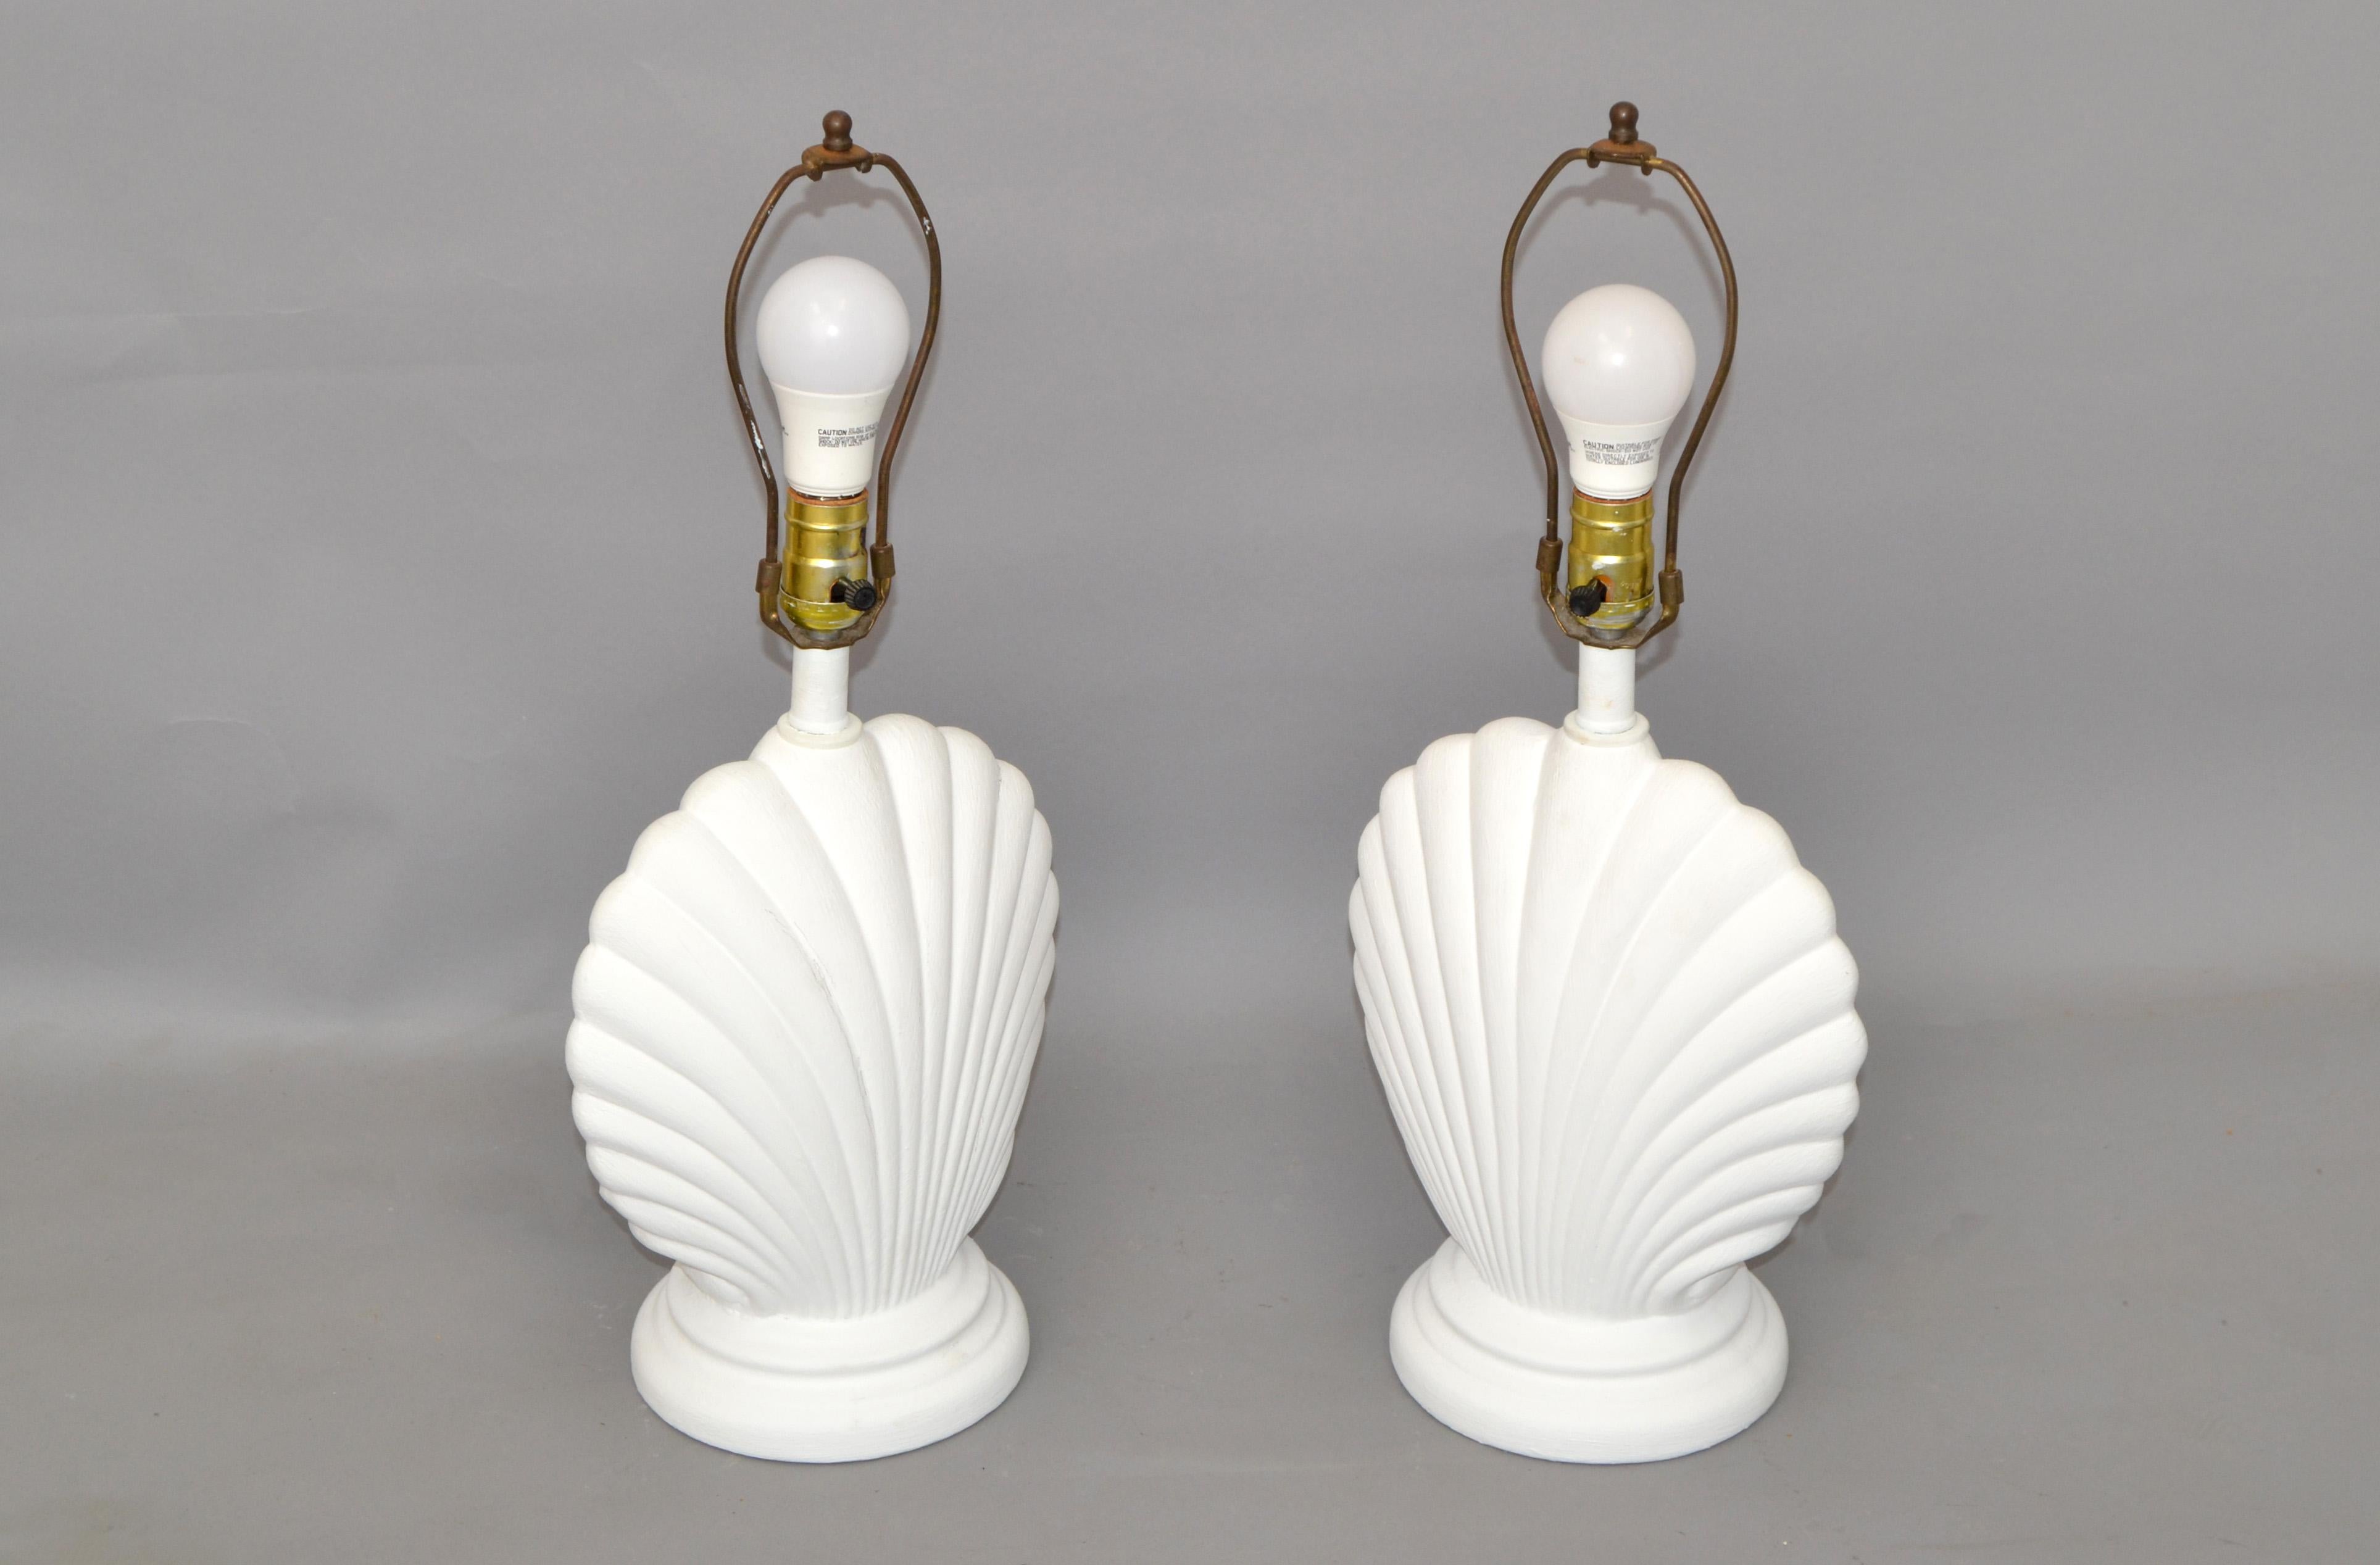 We offer a Pair of Hollywood Regency nautical seashell shaped Plaster Table Lamps with Harp and Finial.
Recently refinished in off white Gesso.
US Wiring and each Lamp takes a regular or LED light bulb.
No Shades.